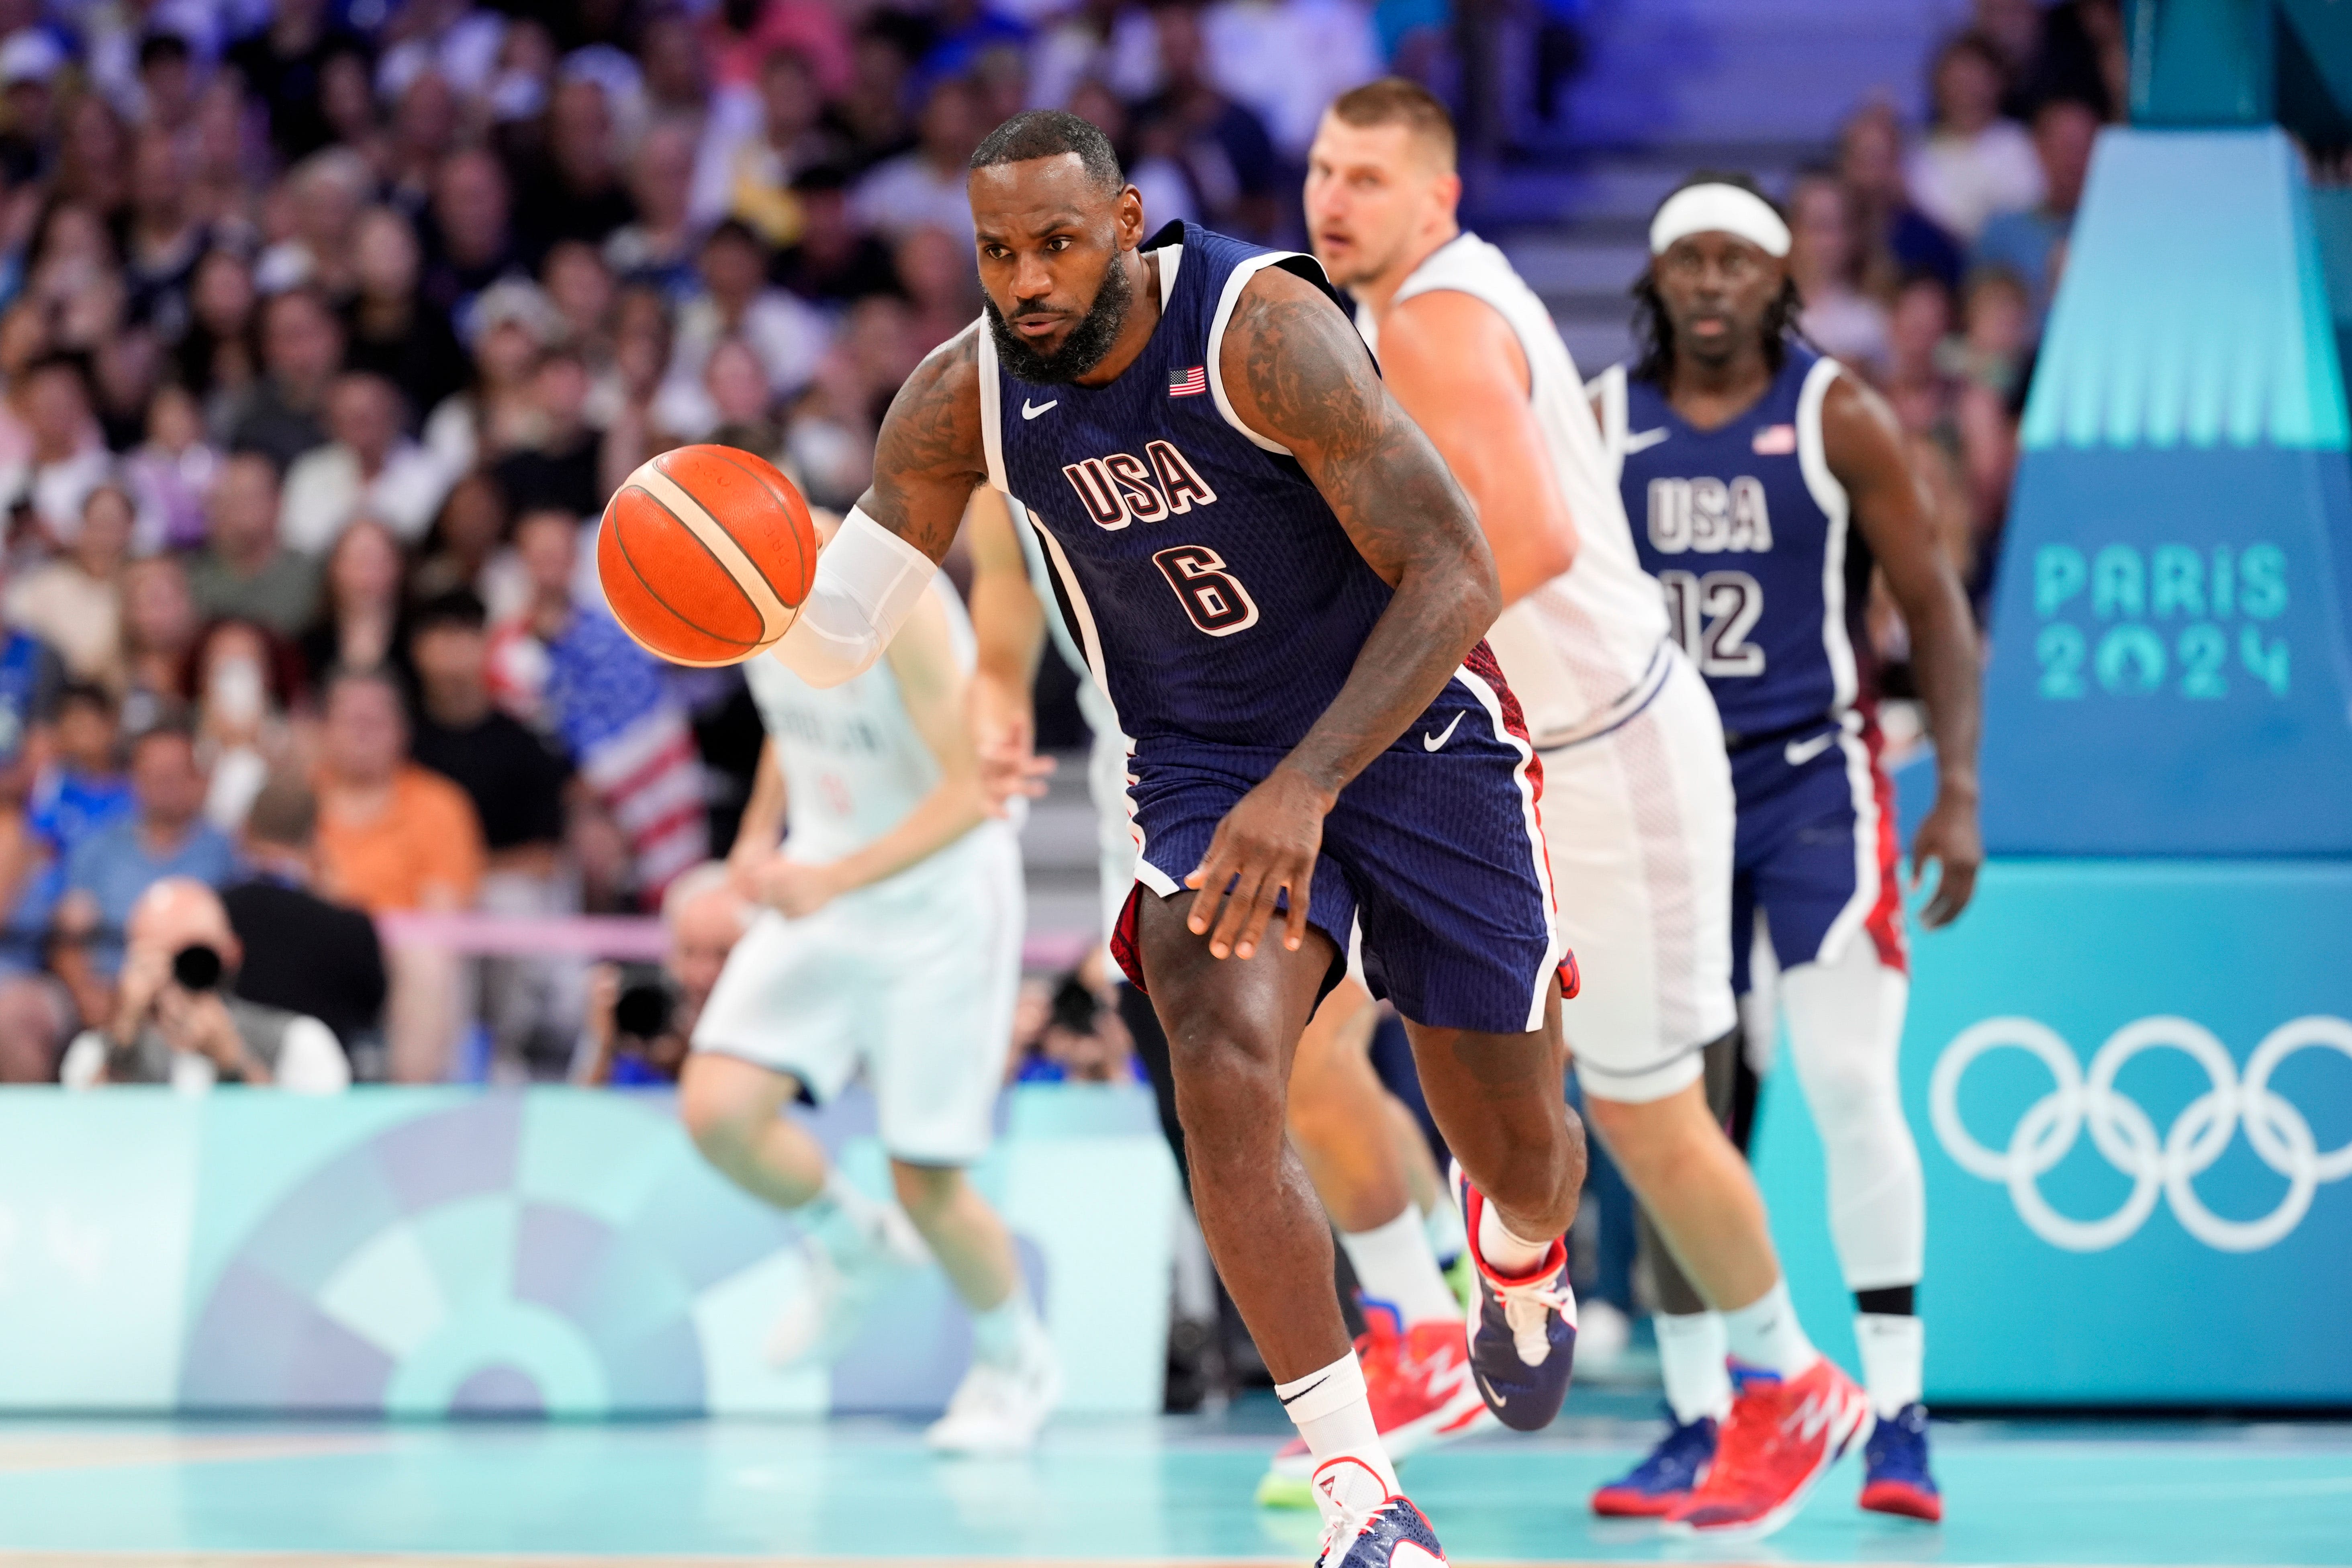 Paris Olympics live updates: Team USA men's basketball wins big, how to watch, medal count